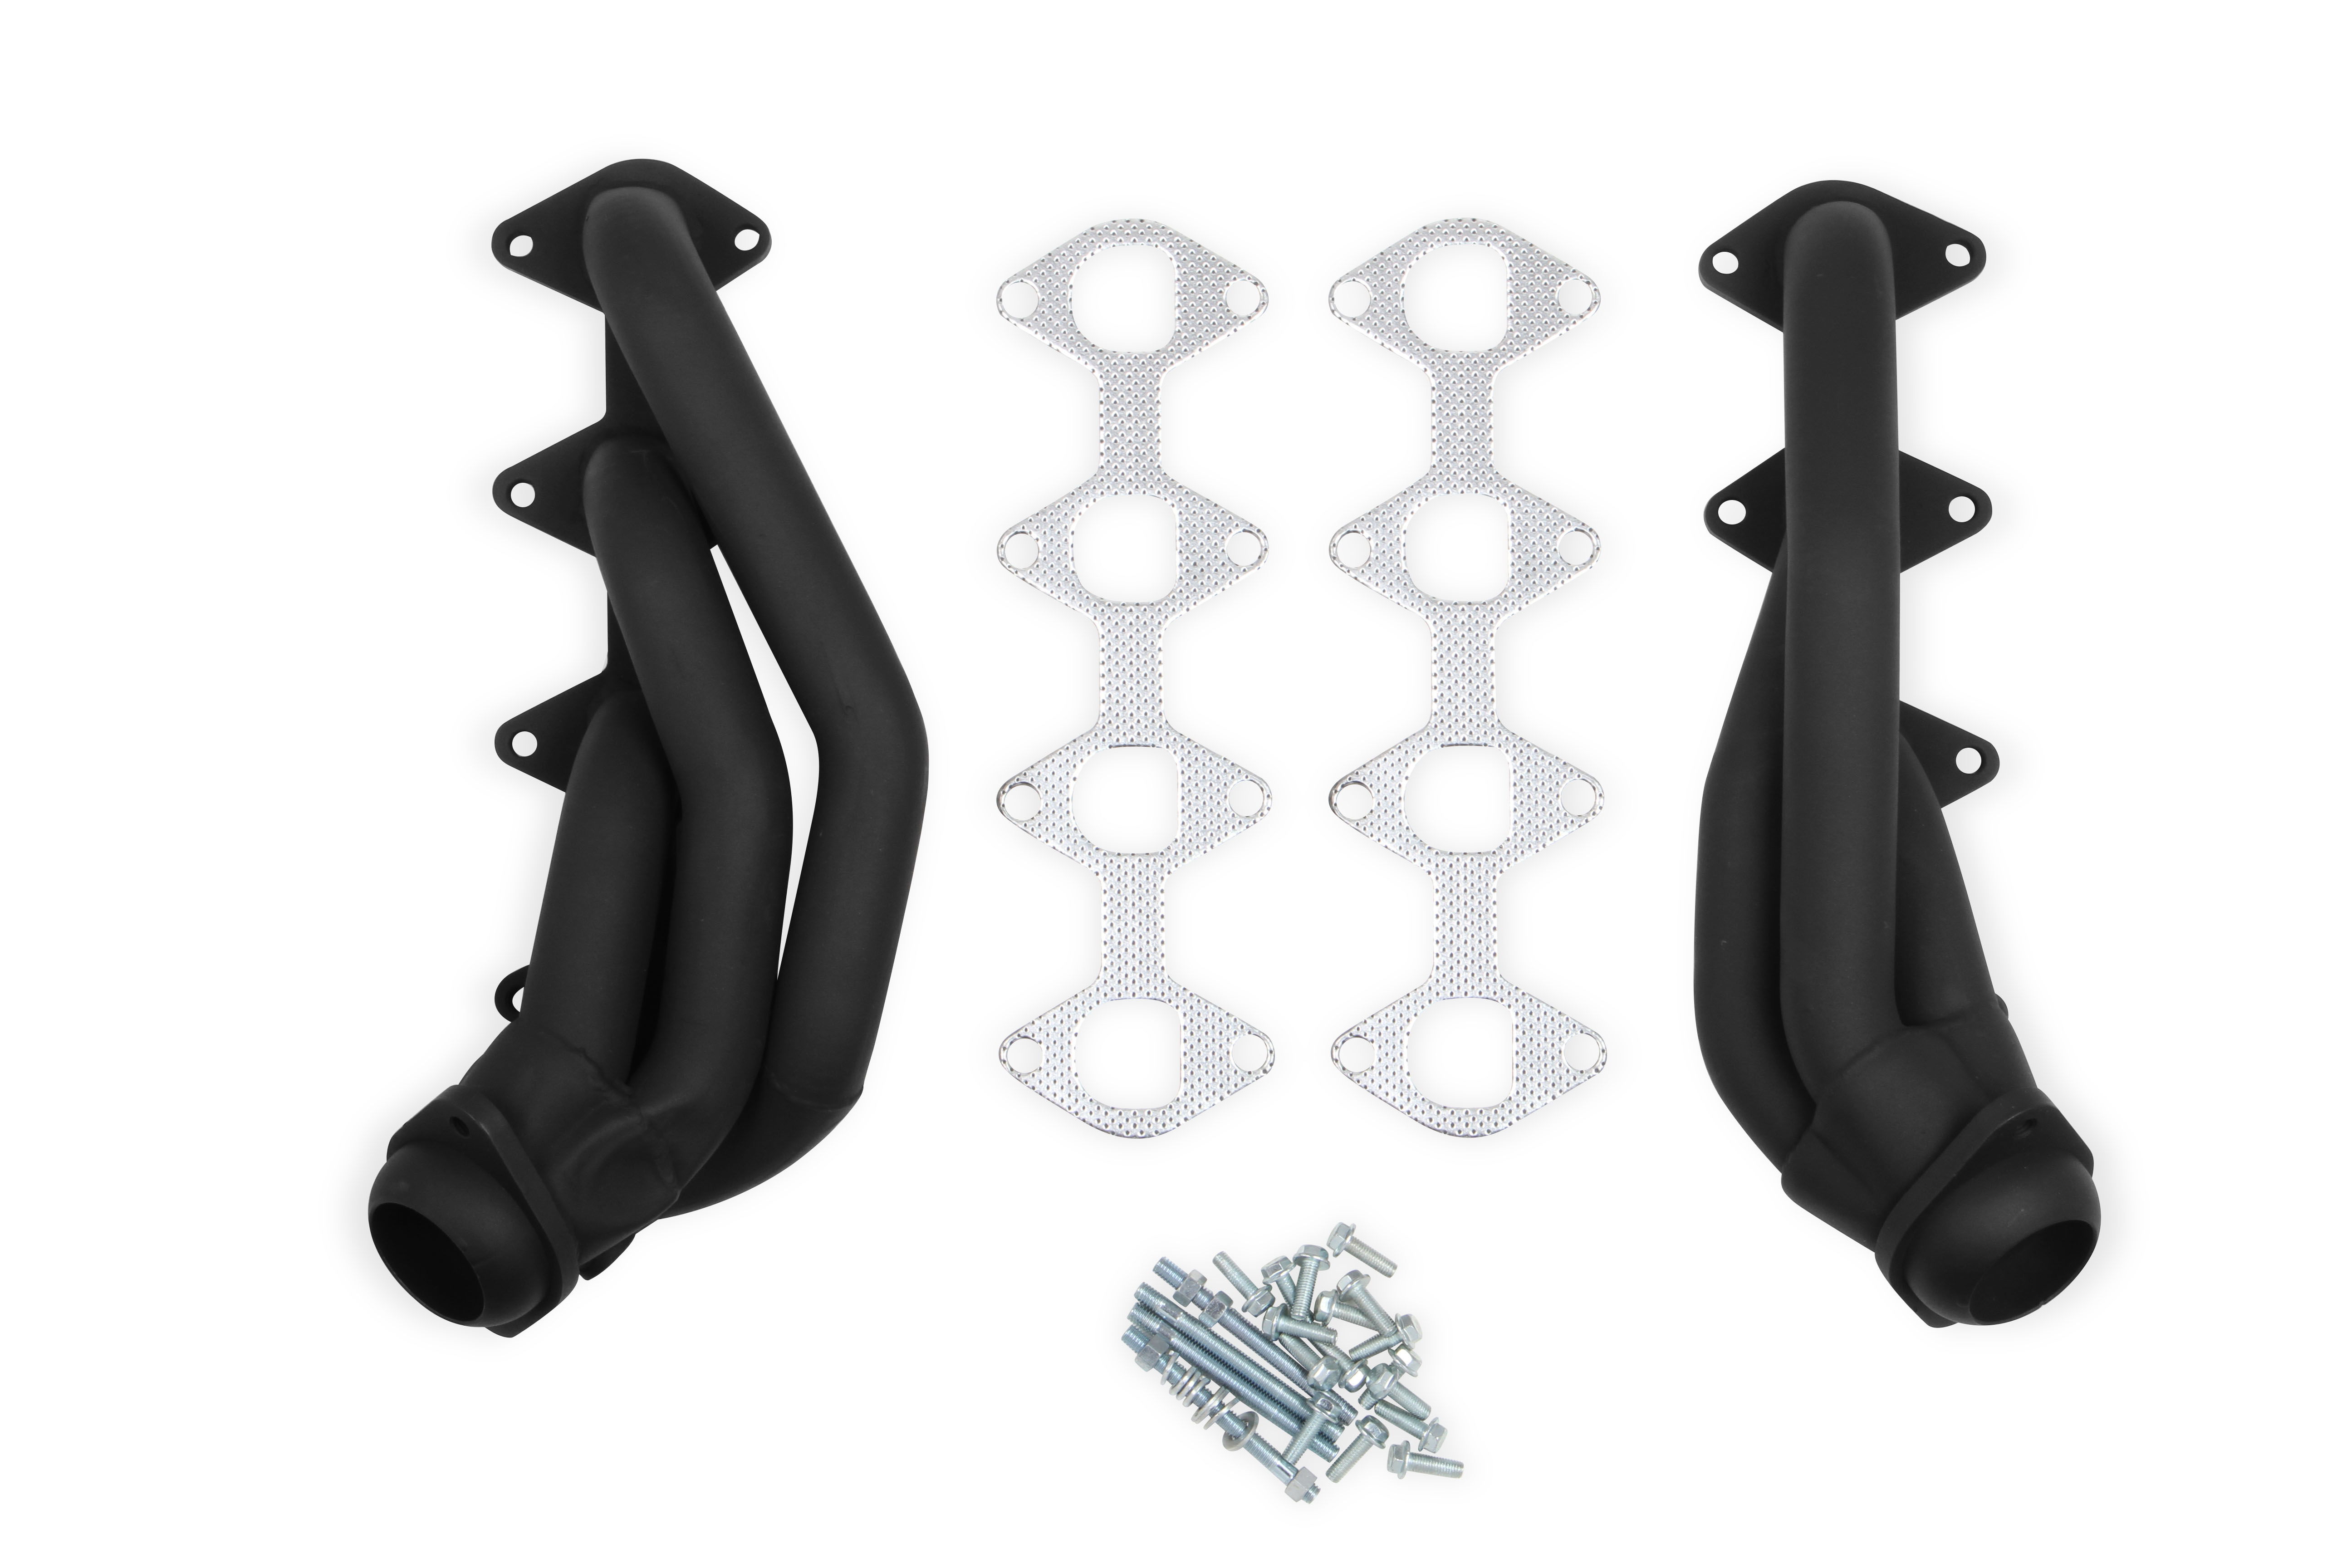 2005-2010 Ford Mustang 4.6L V8 Flowtech 1 5/8" 409SS Shorty Headers - Black Painted Finish